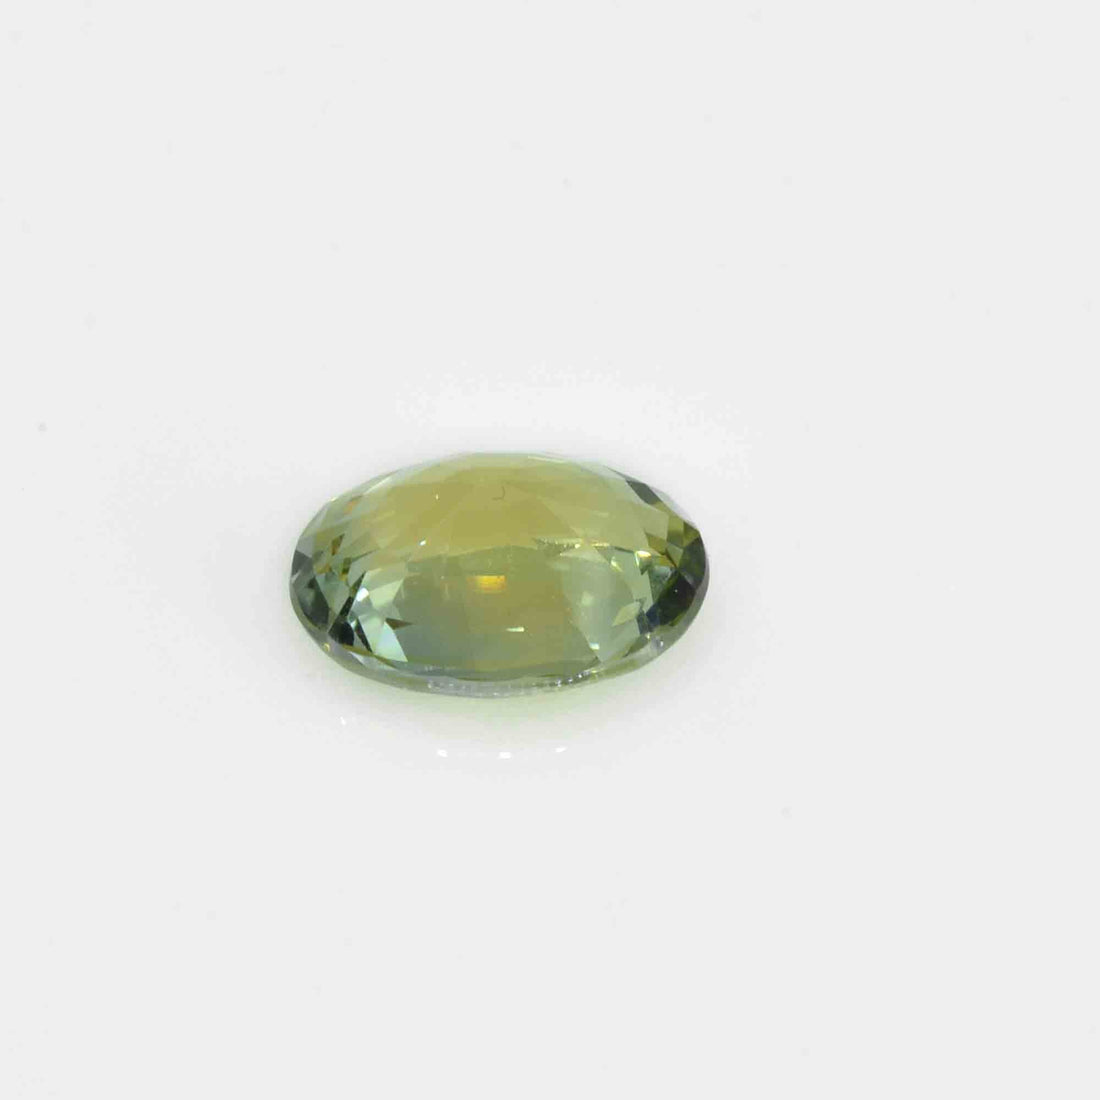 2.14 Cts Natural Fancy Sapphire Loose Pair Gemstone Oval Cut